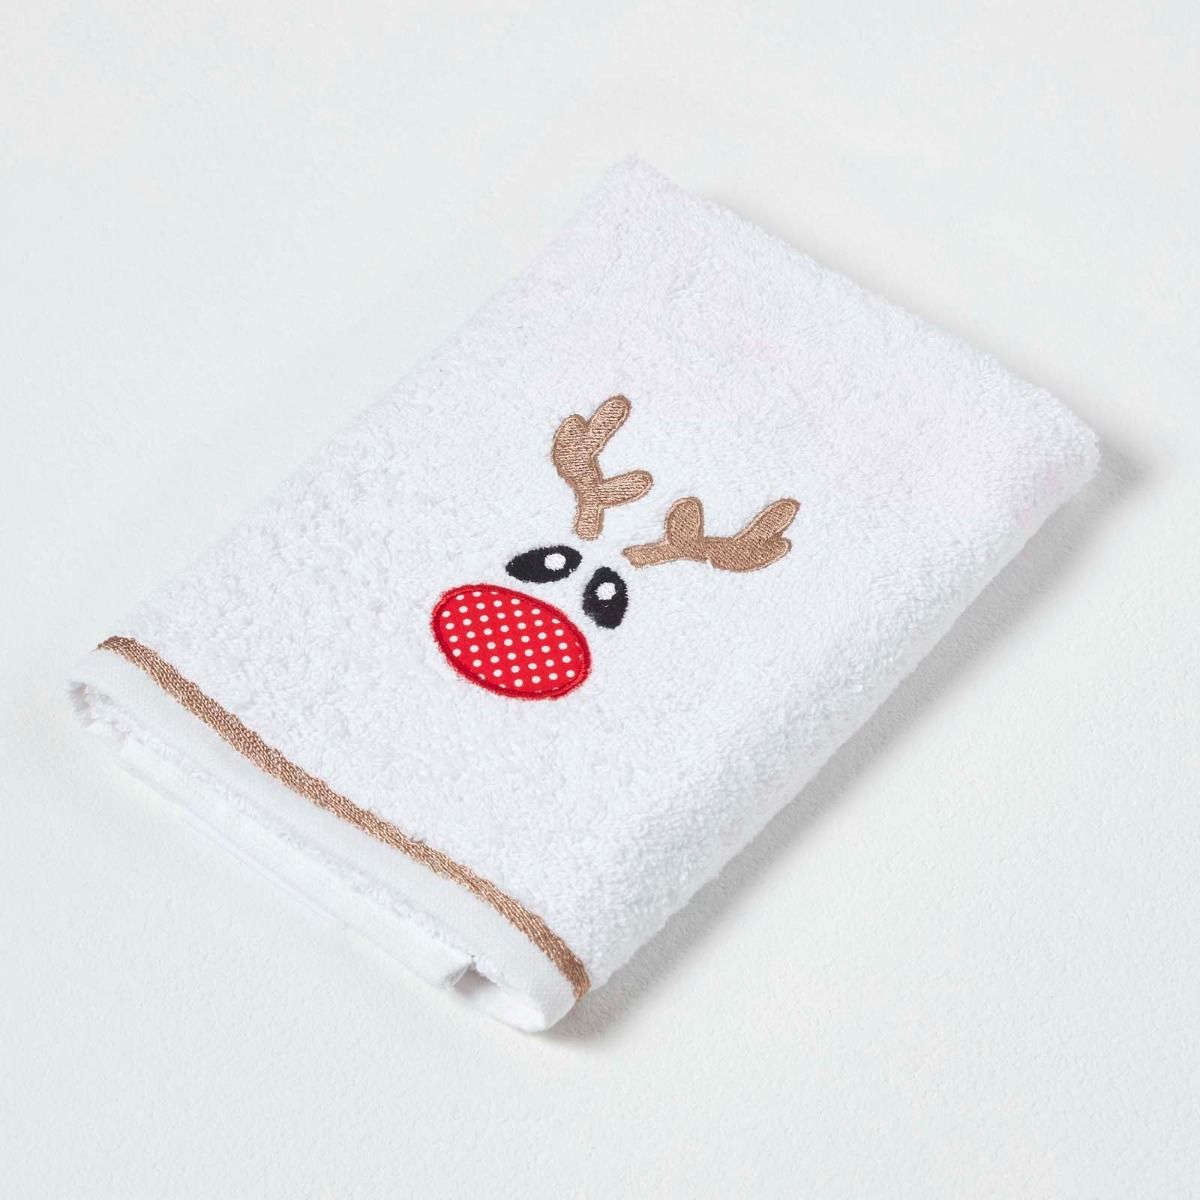 HOMESCAPES Rudolph Reindeer Embroidered Christmas Towel 100% Cotton White Hand Towel with Decorative Festive Design SIZE Guest Towel for Bathroom or Xmas Gift